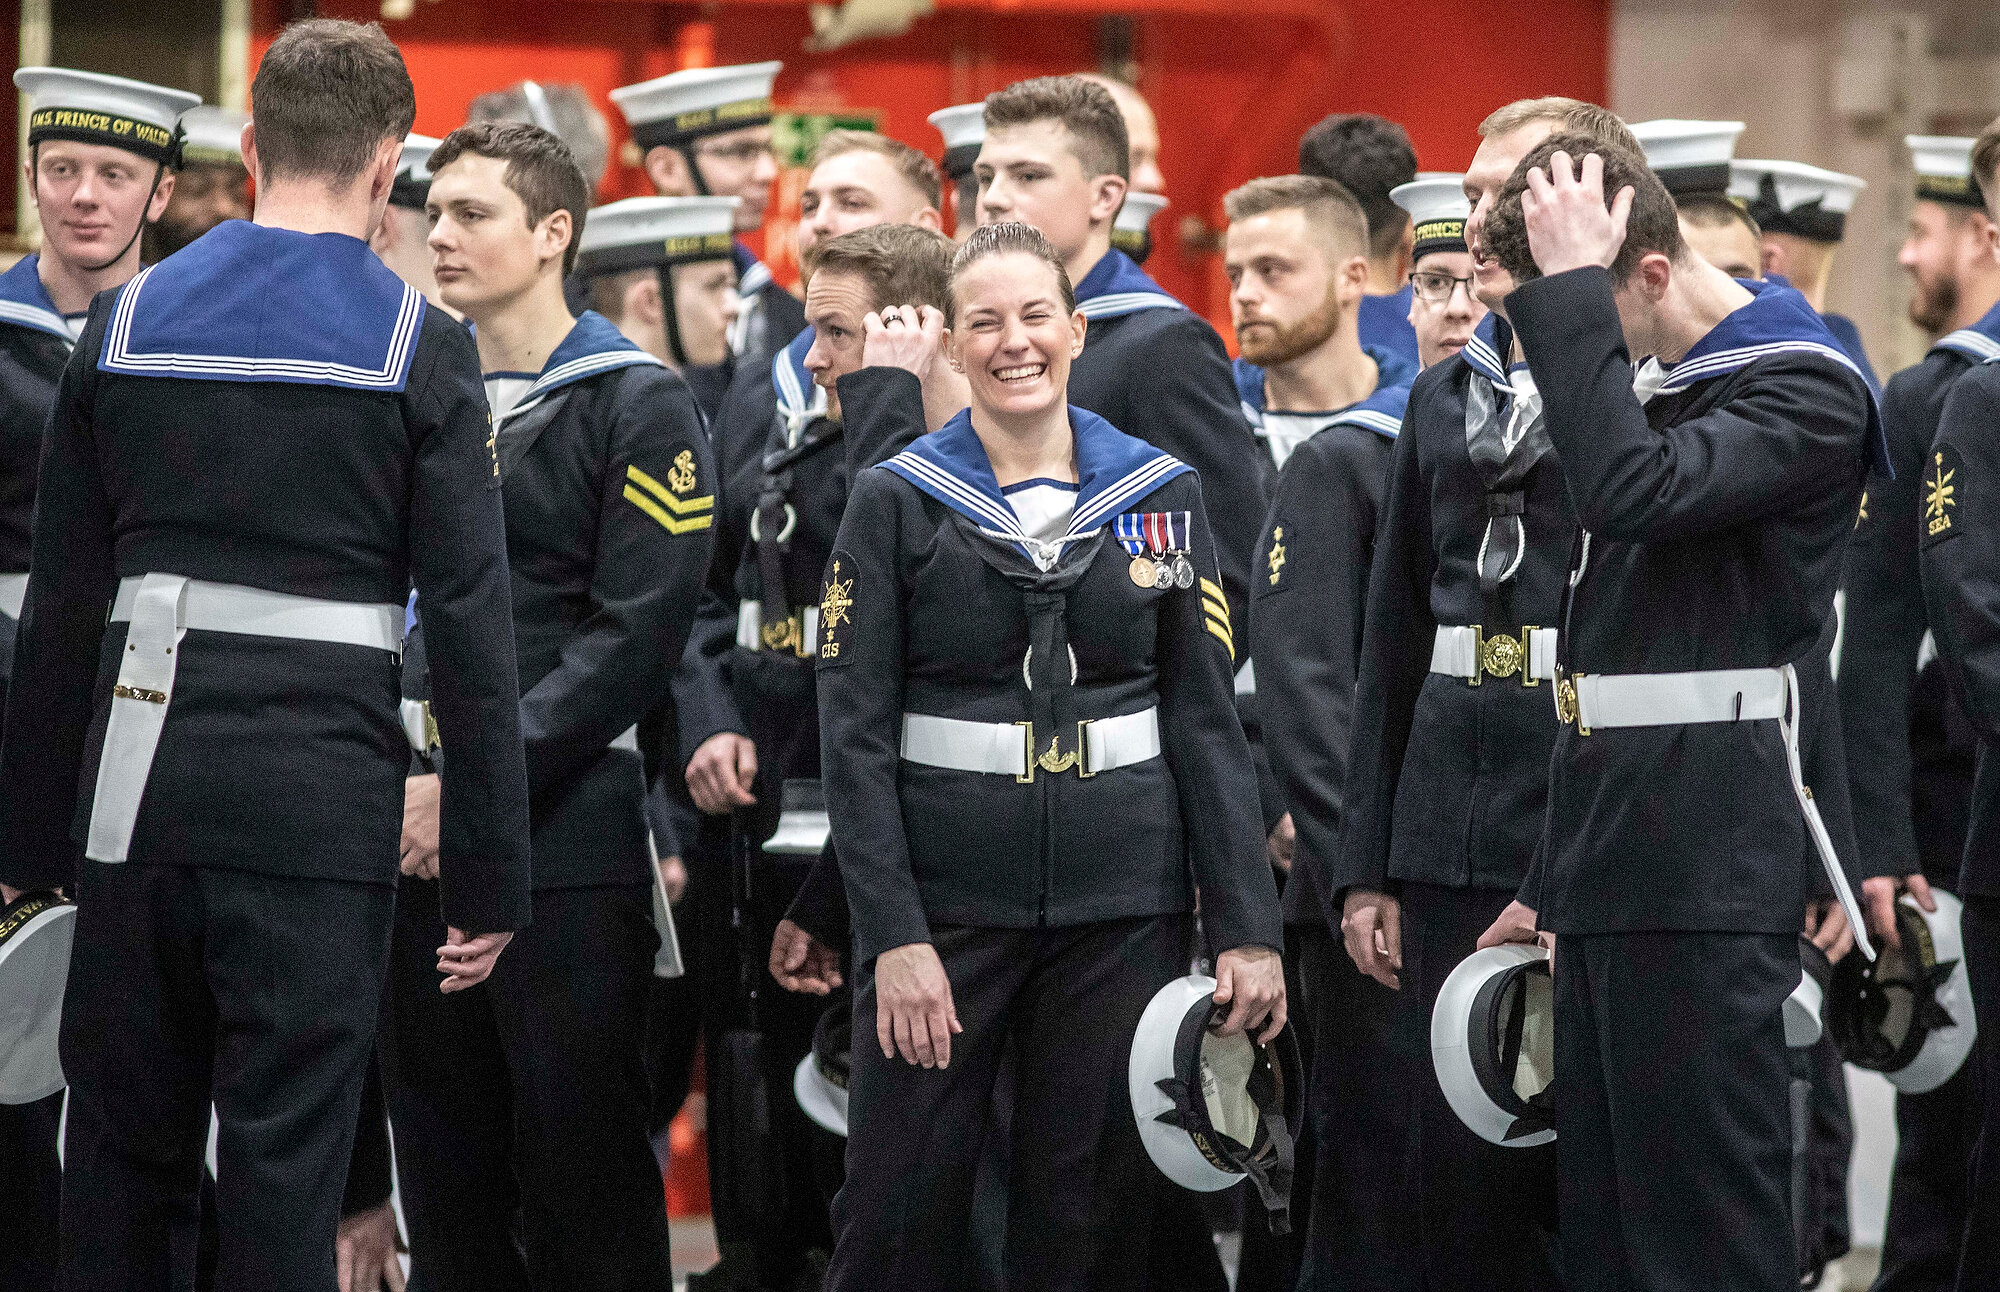  The honour guard of crew members of Britain's newest aircraft carrier HMS Prince of Wales prepare to go on parade for the ship's commissioning ceremony inside the giant hangar of the ship moored in Portsmouth. Photo: Richard Pohle/The Times, 10 Dece